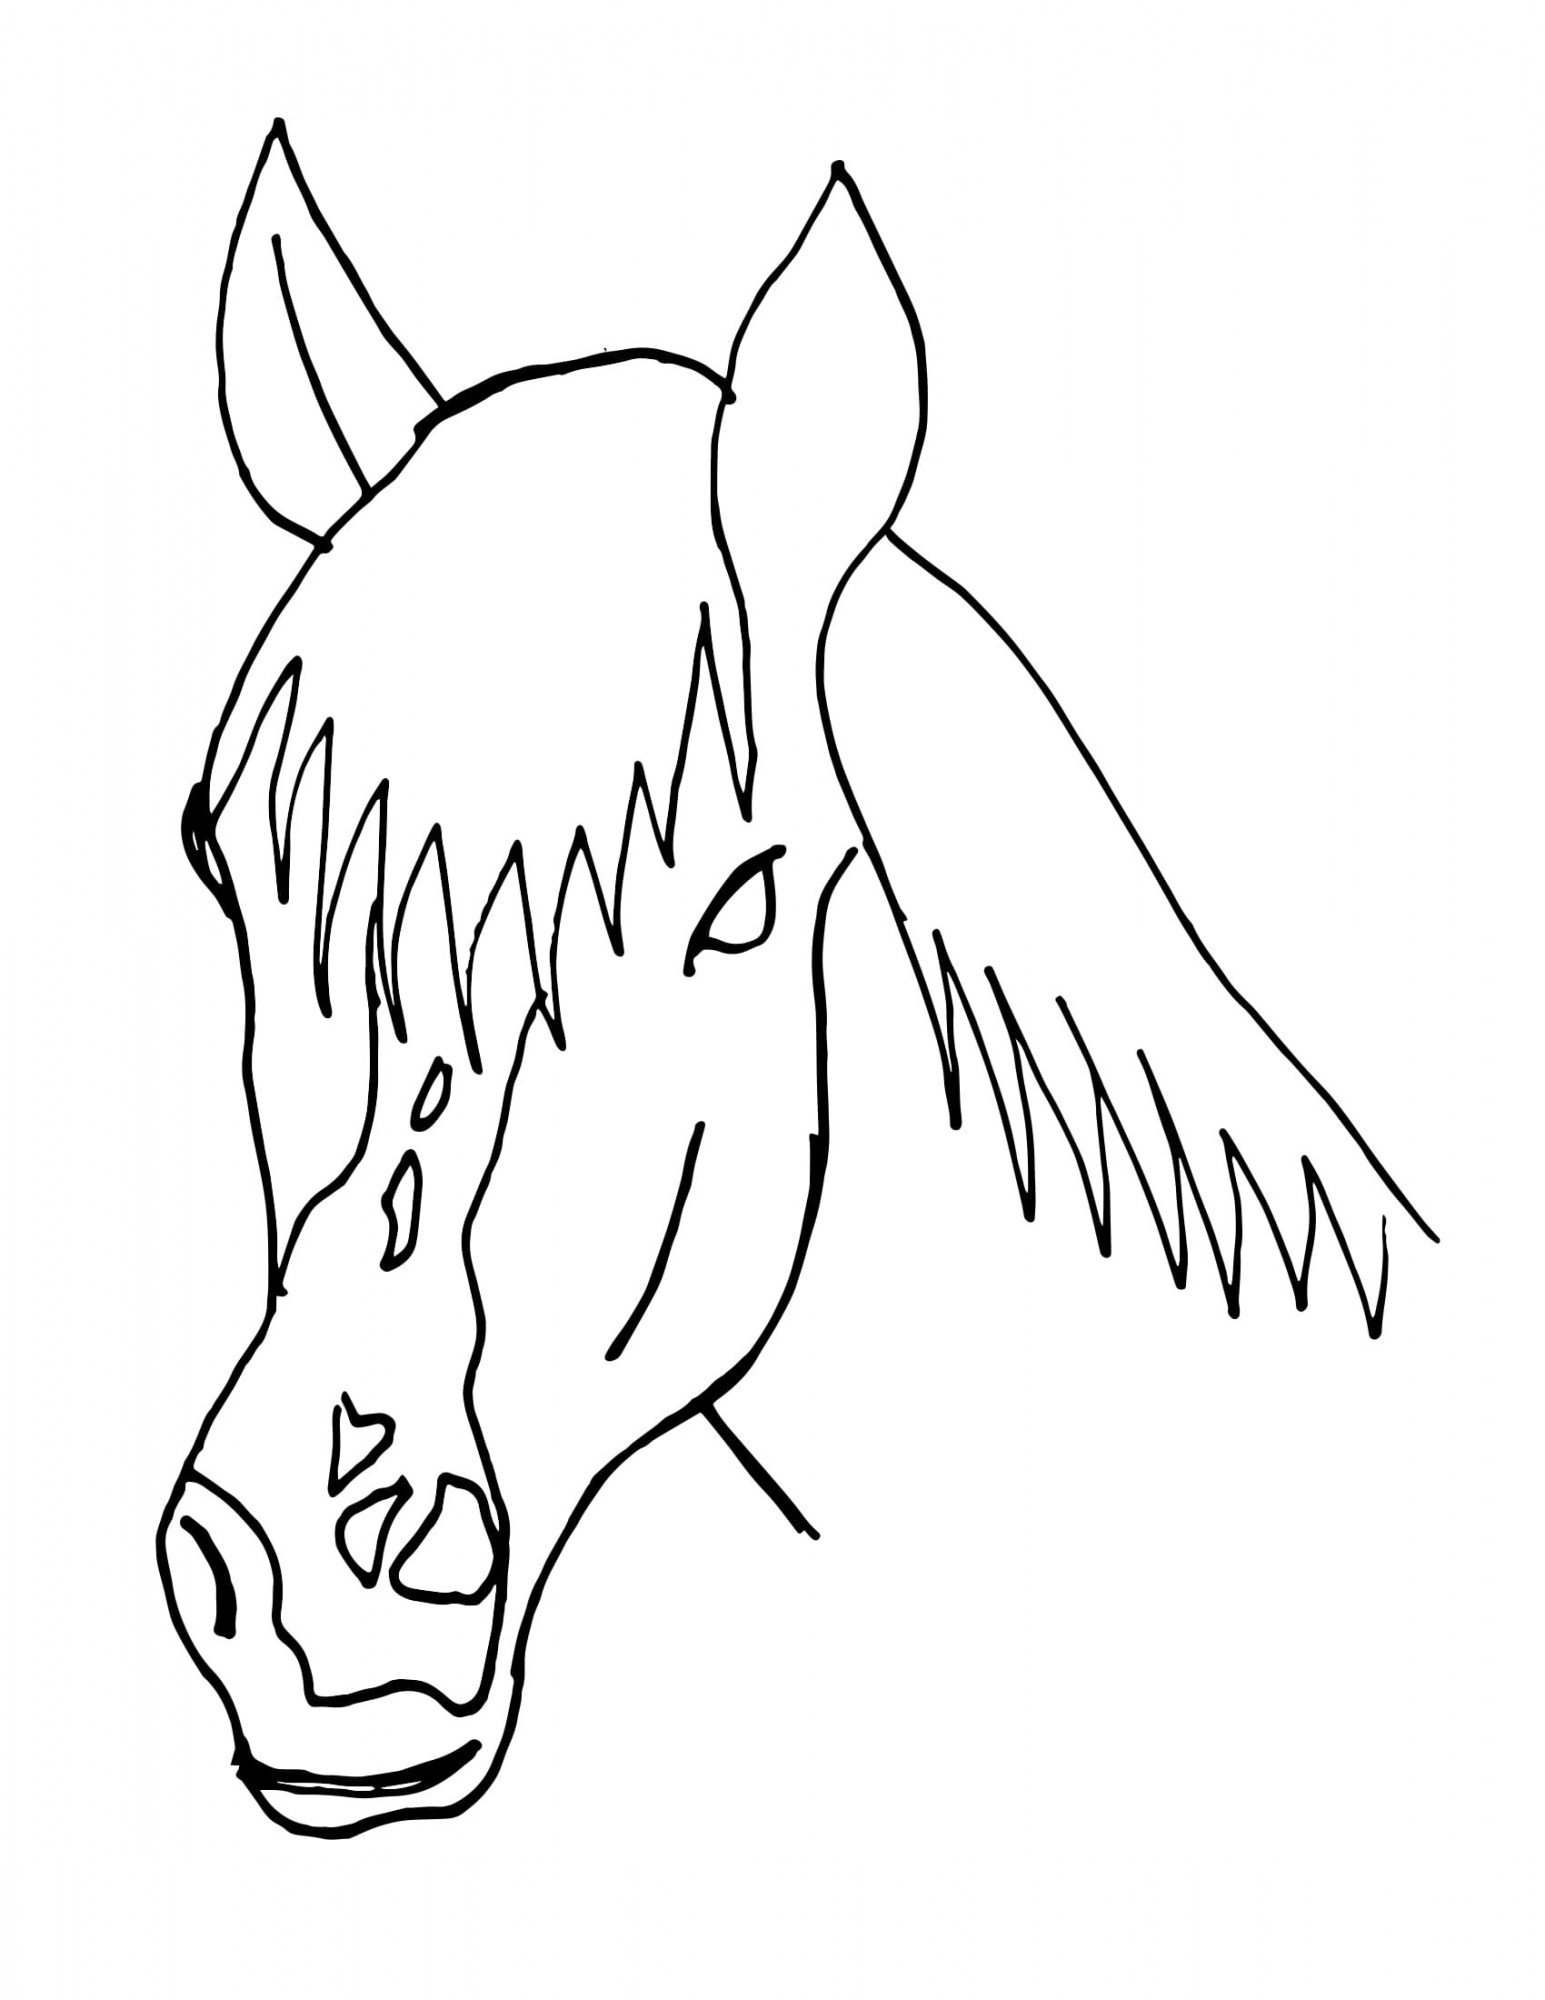 Horse "Princess" - black and white ouline for coloring